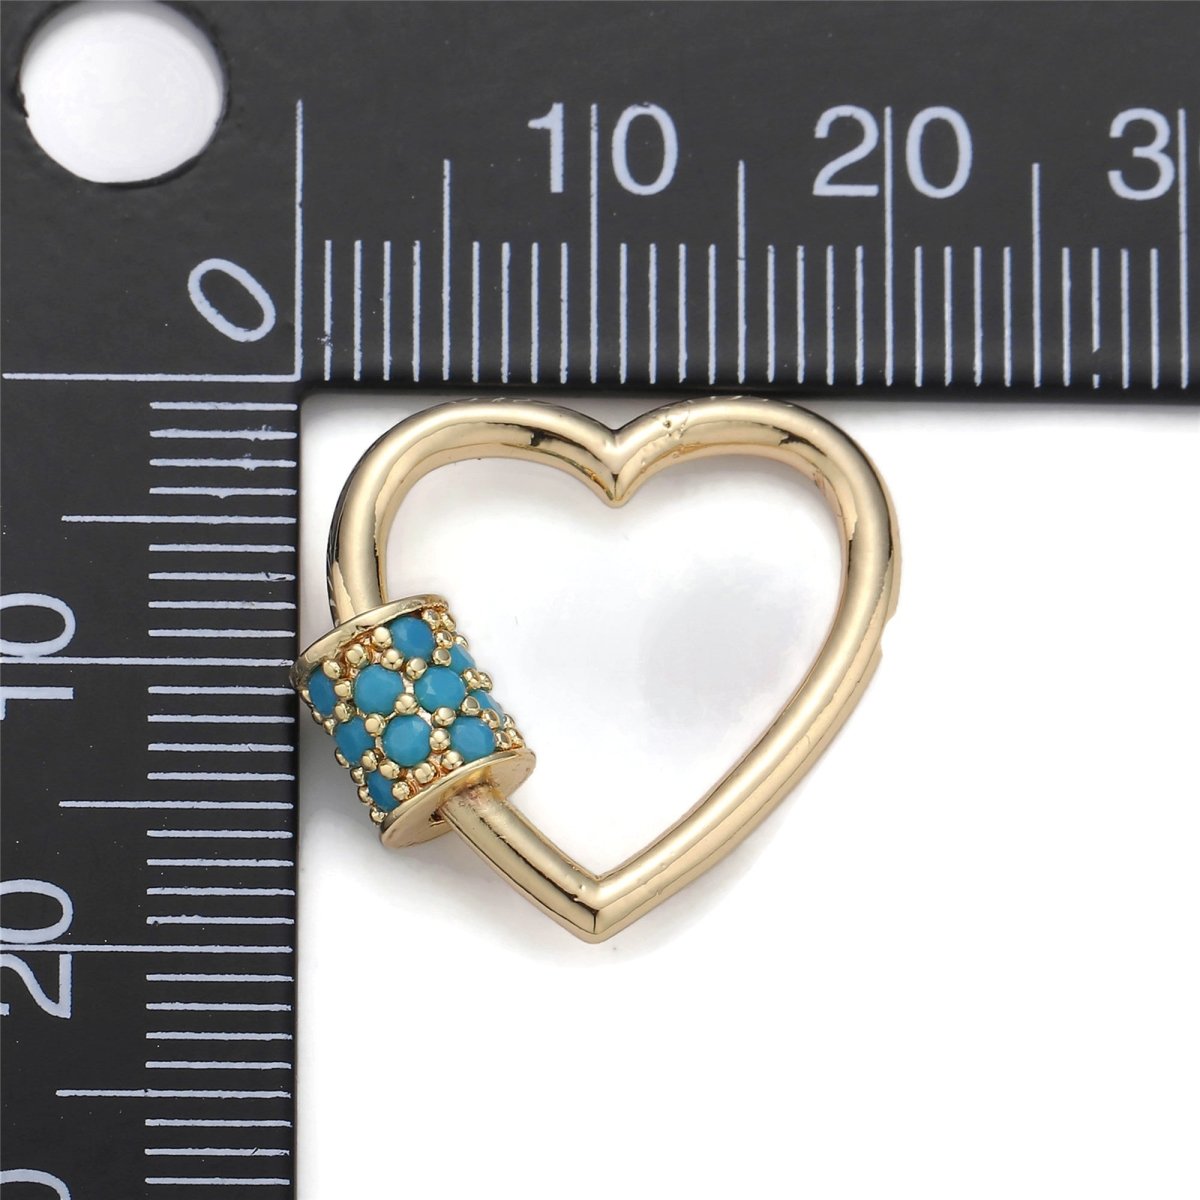 24K Gold-Plated Heart Carabiner, Circular Screw Clasp with Colored Rhinestones - DLUXCA